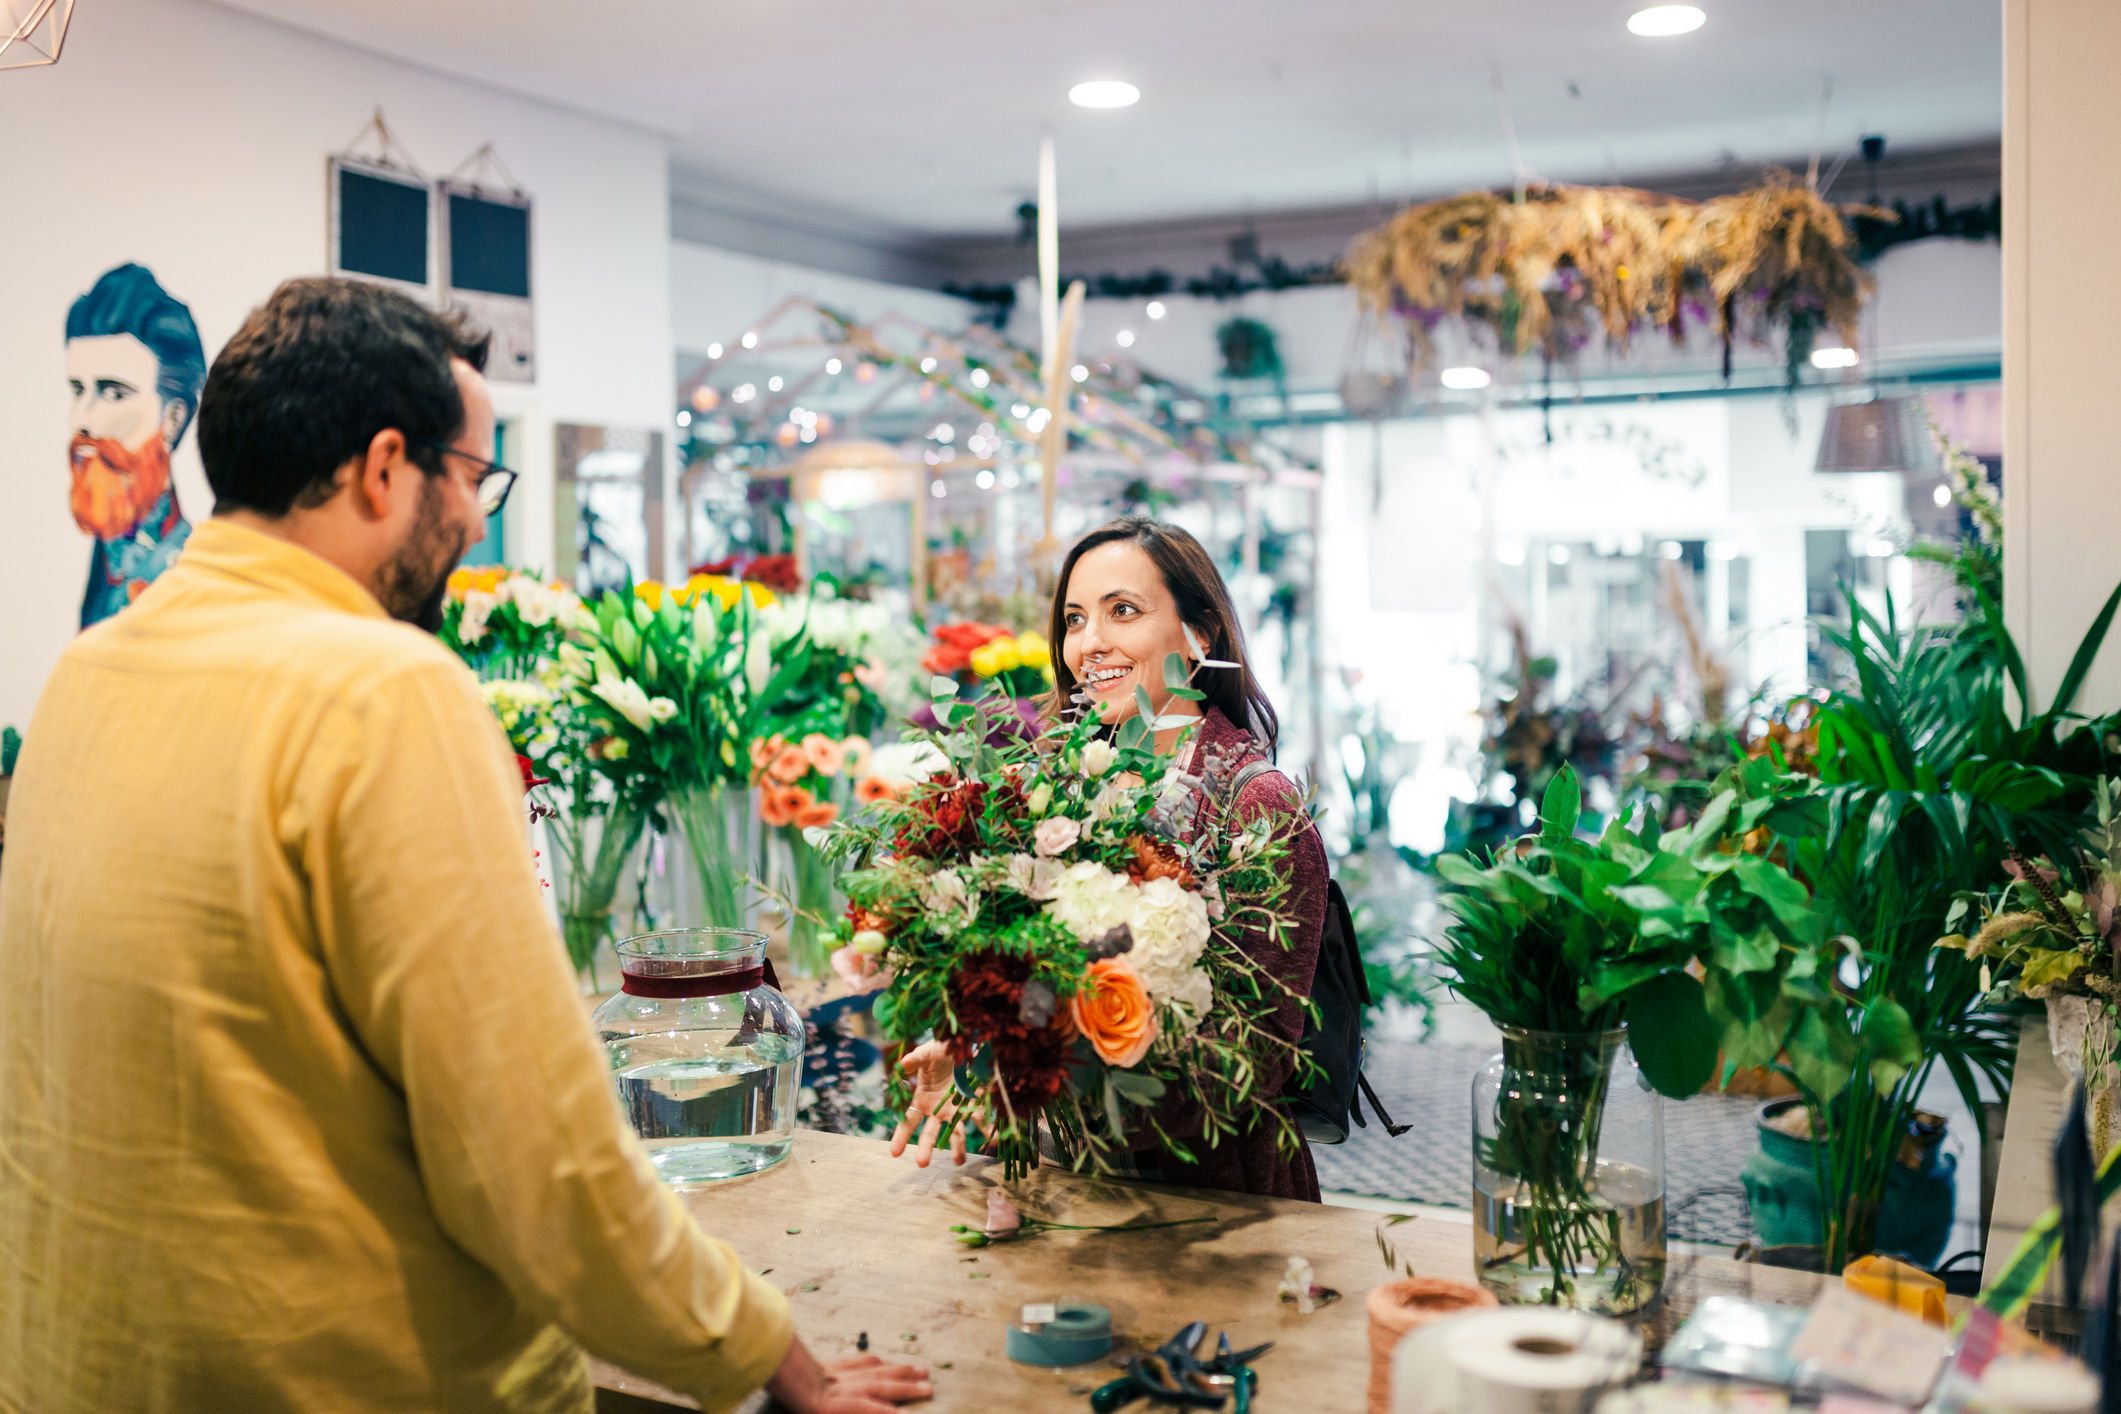 Customer buying a bouquet of flowers in a florist's storefront shop